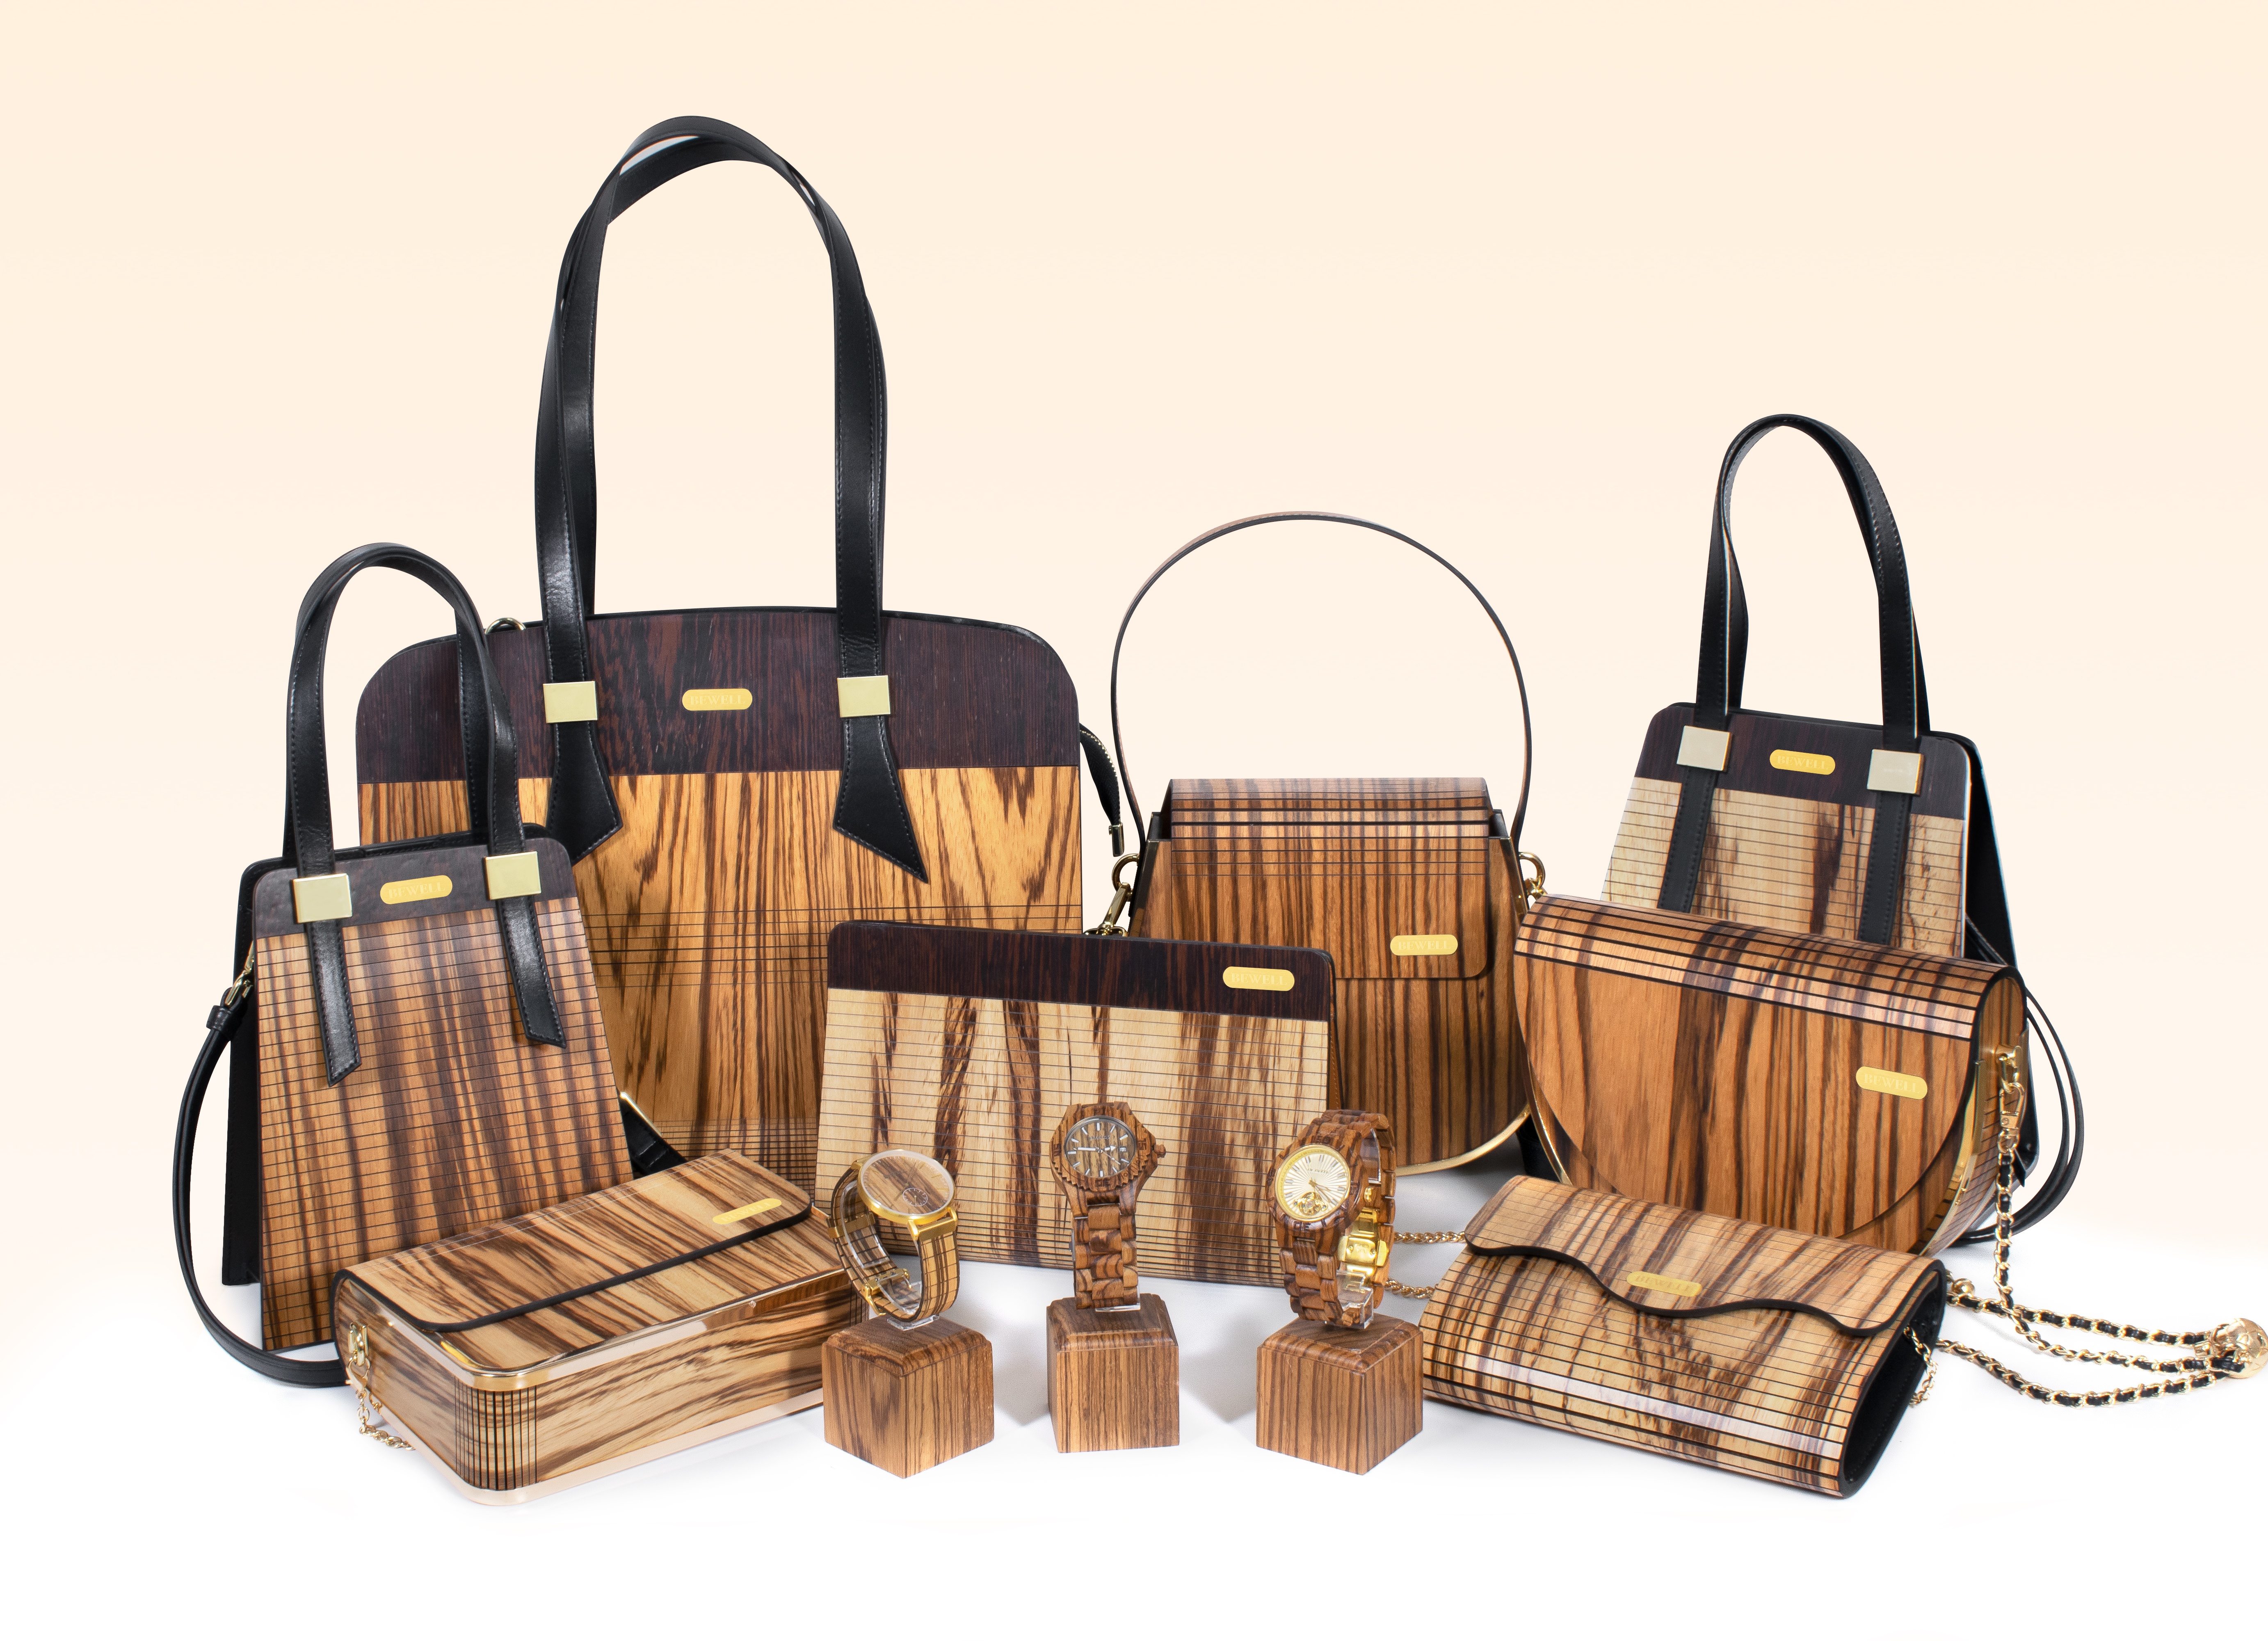 Launch Innovative Wooden Bags/Watches with Zhongshi - Zebra Wood Collection